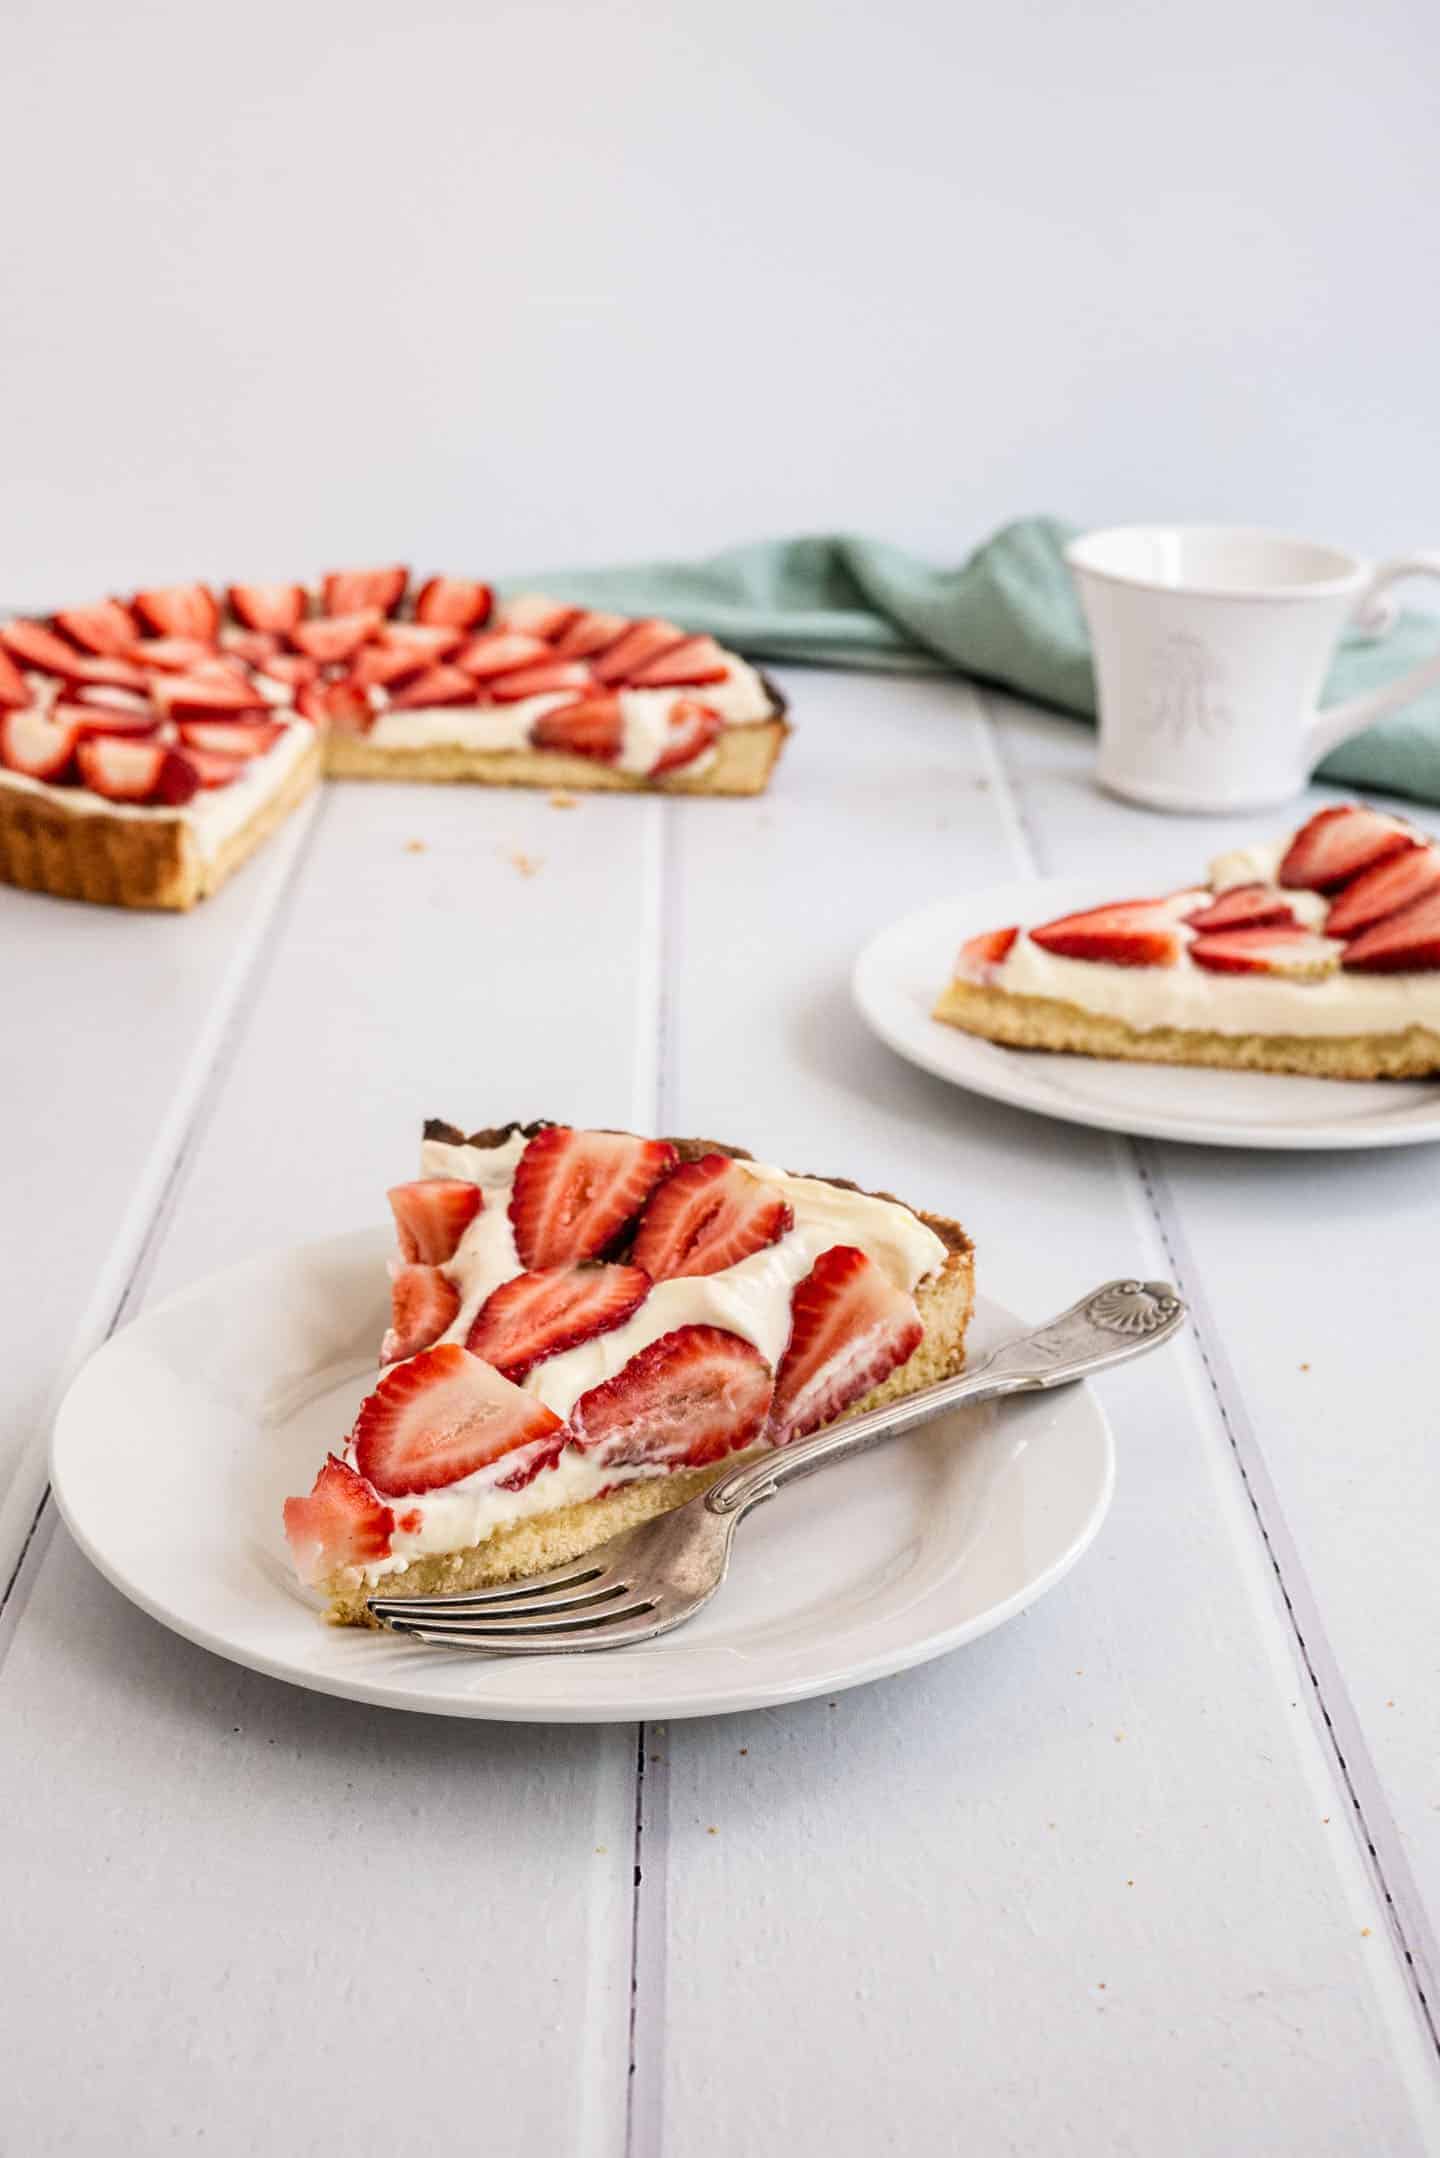 Strawberry and Cream Tart at the moment of dessert. Simple as a buttery shortbread crust, smooth creamy filling and a fresh strawberry topping.